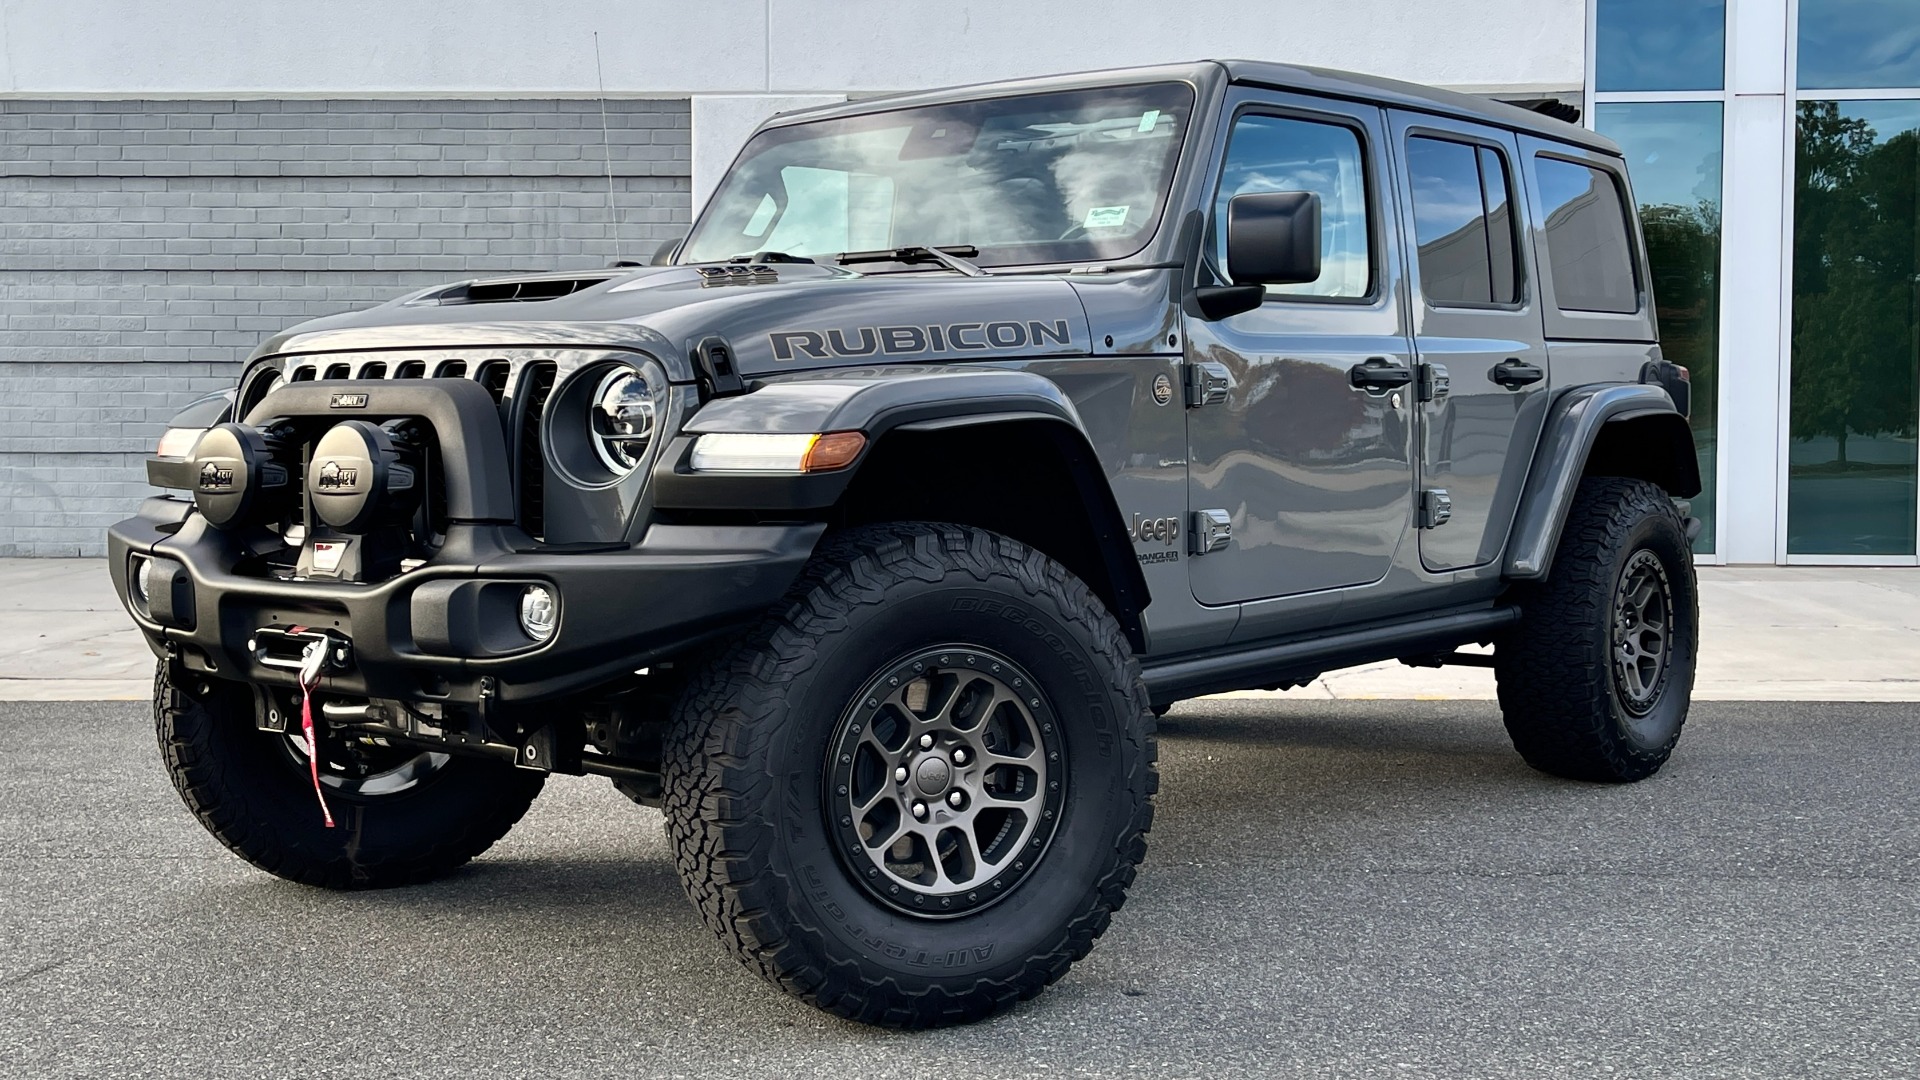 Used 2022 Jeep Wrangler UNLIMITED RUBICON 392 $10K AEV UPGRADES / XTREME RECON / SKY ONE TOUCH for sale $95,798 at Formula Imports in Charlotte NC 28227 1